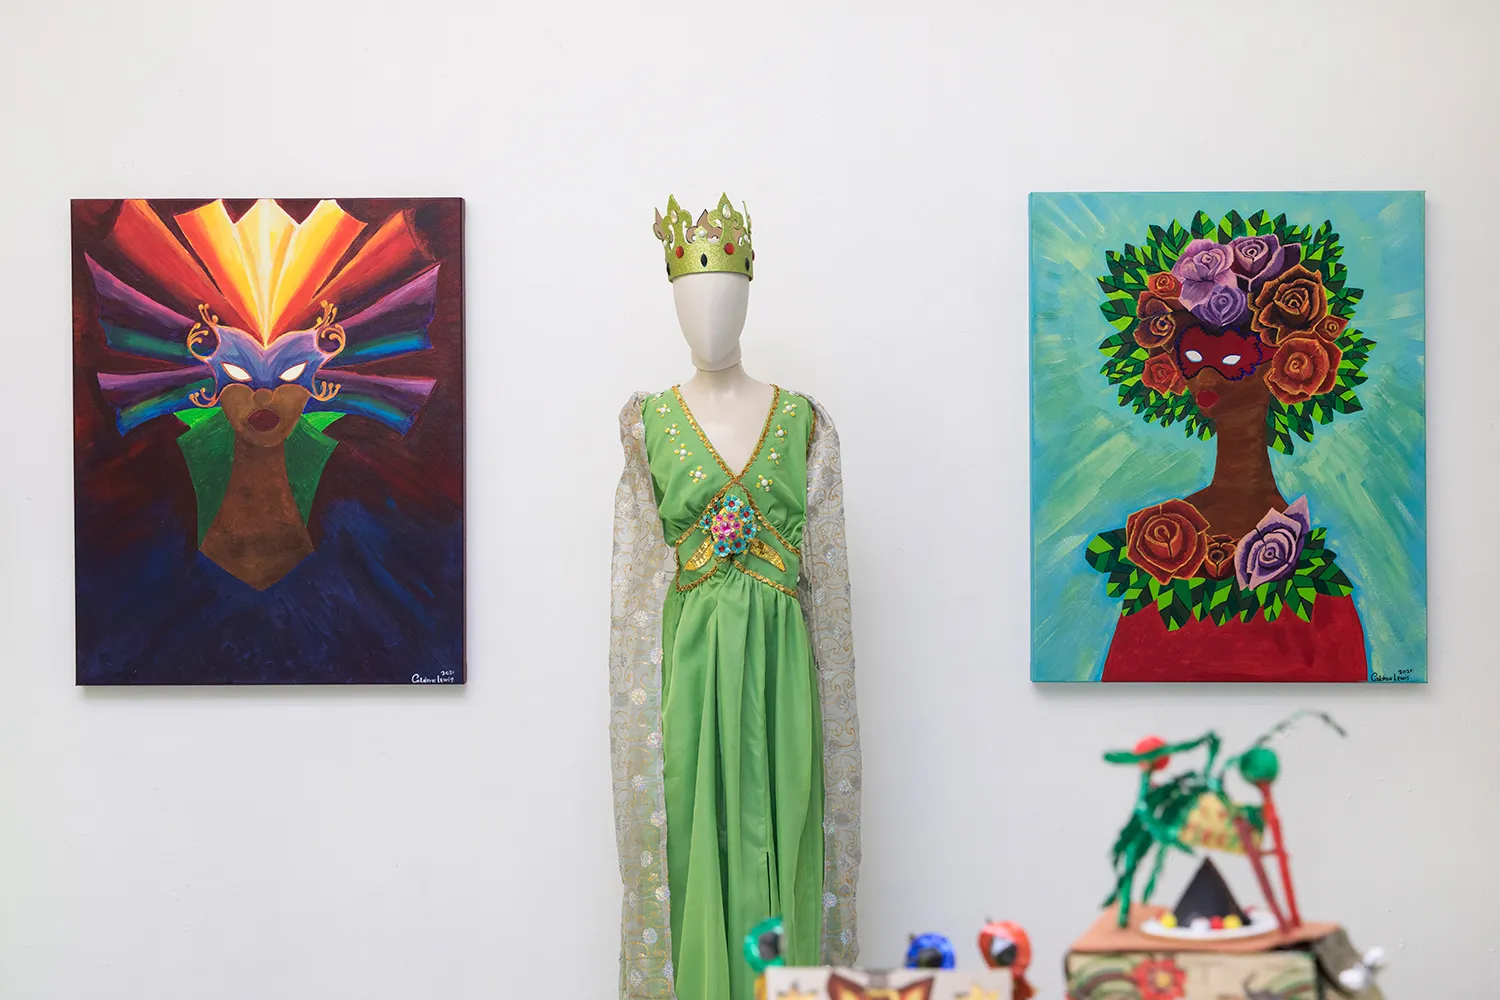 A face-less mannequin with a green dress and a crown stands in the middle of two paintings of a masked person